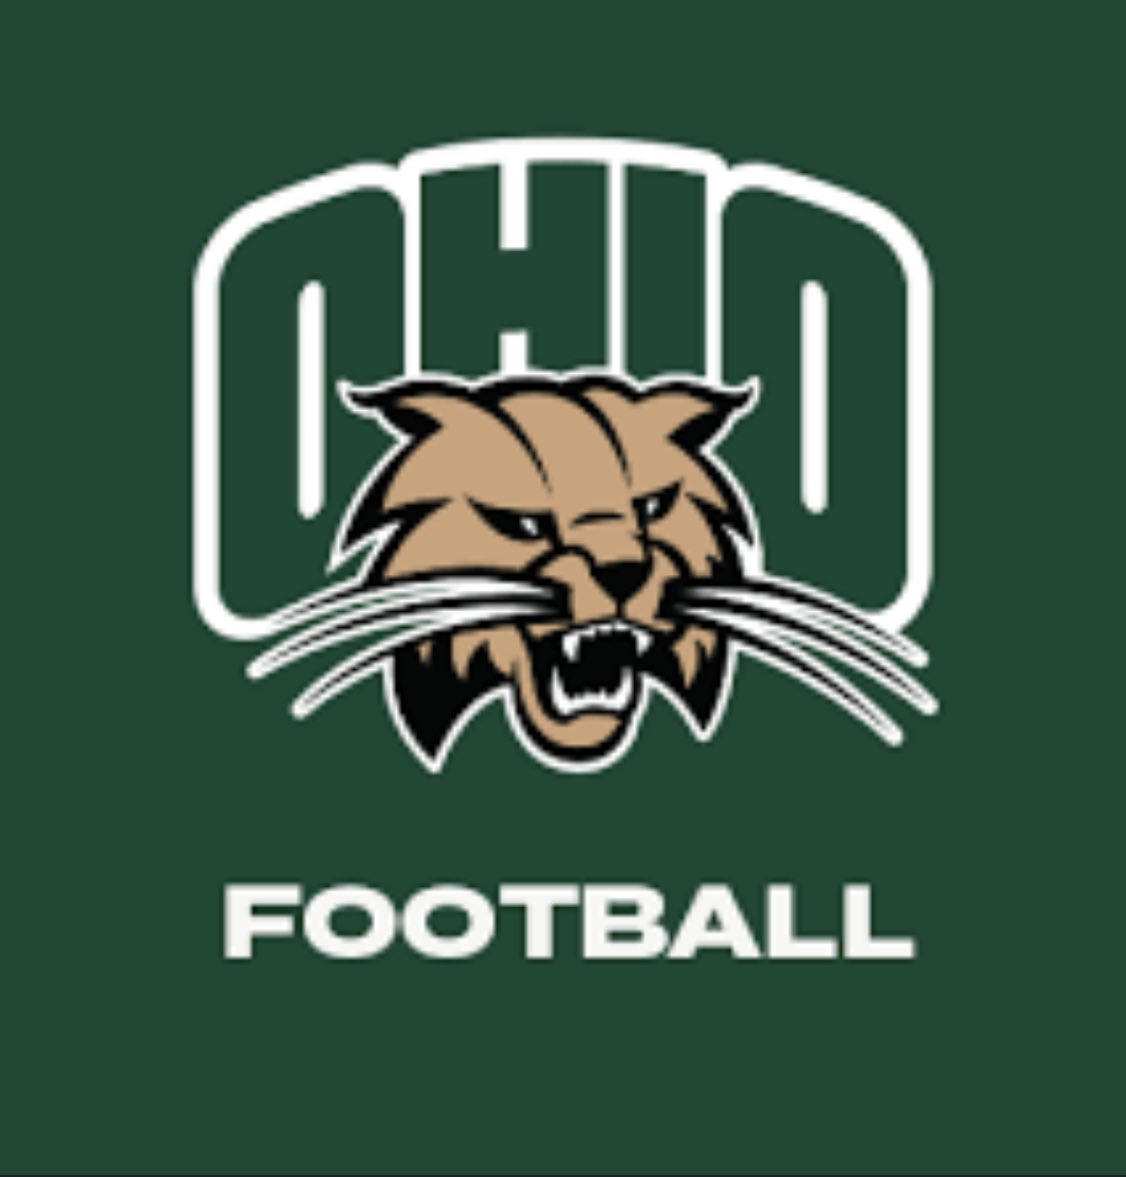 Blessed to receive a division 1 offer from Ohio University @CoachJohnHauser @OhioFootball